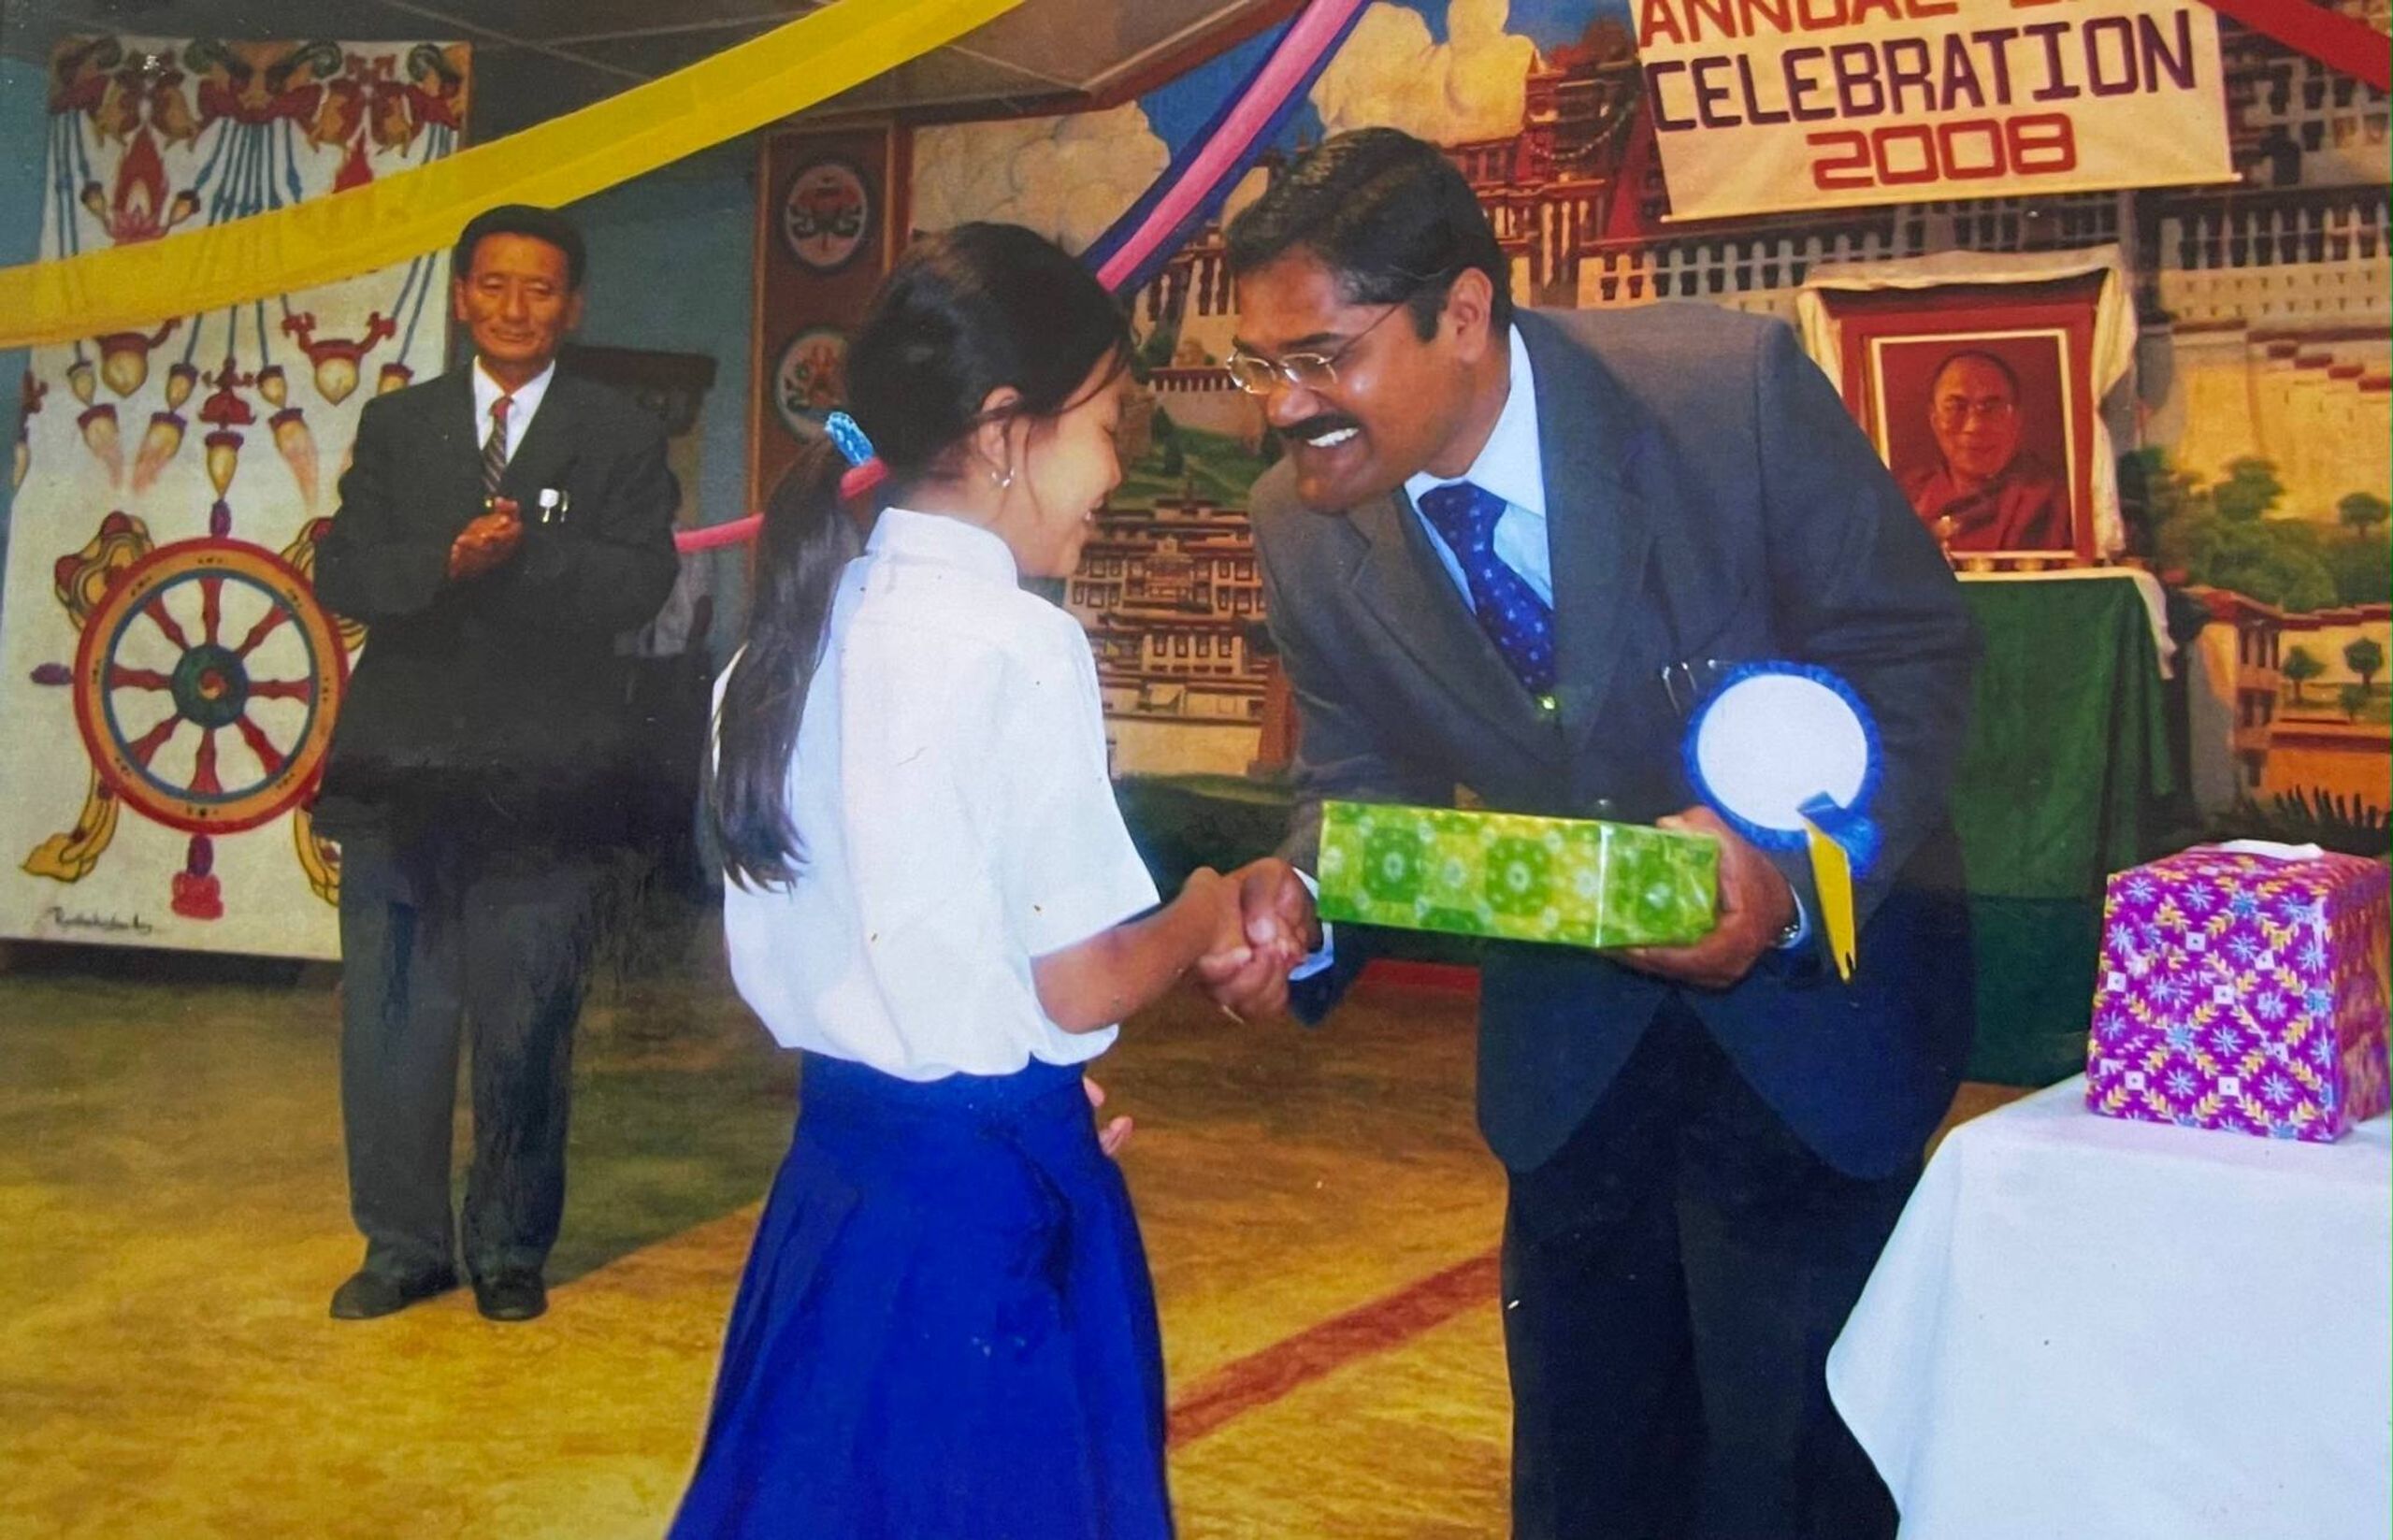 Young girl shaking the hand of an older man dressed formally